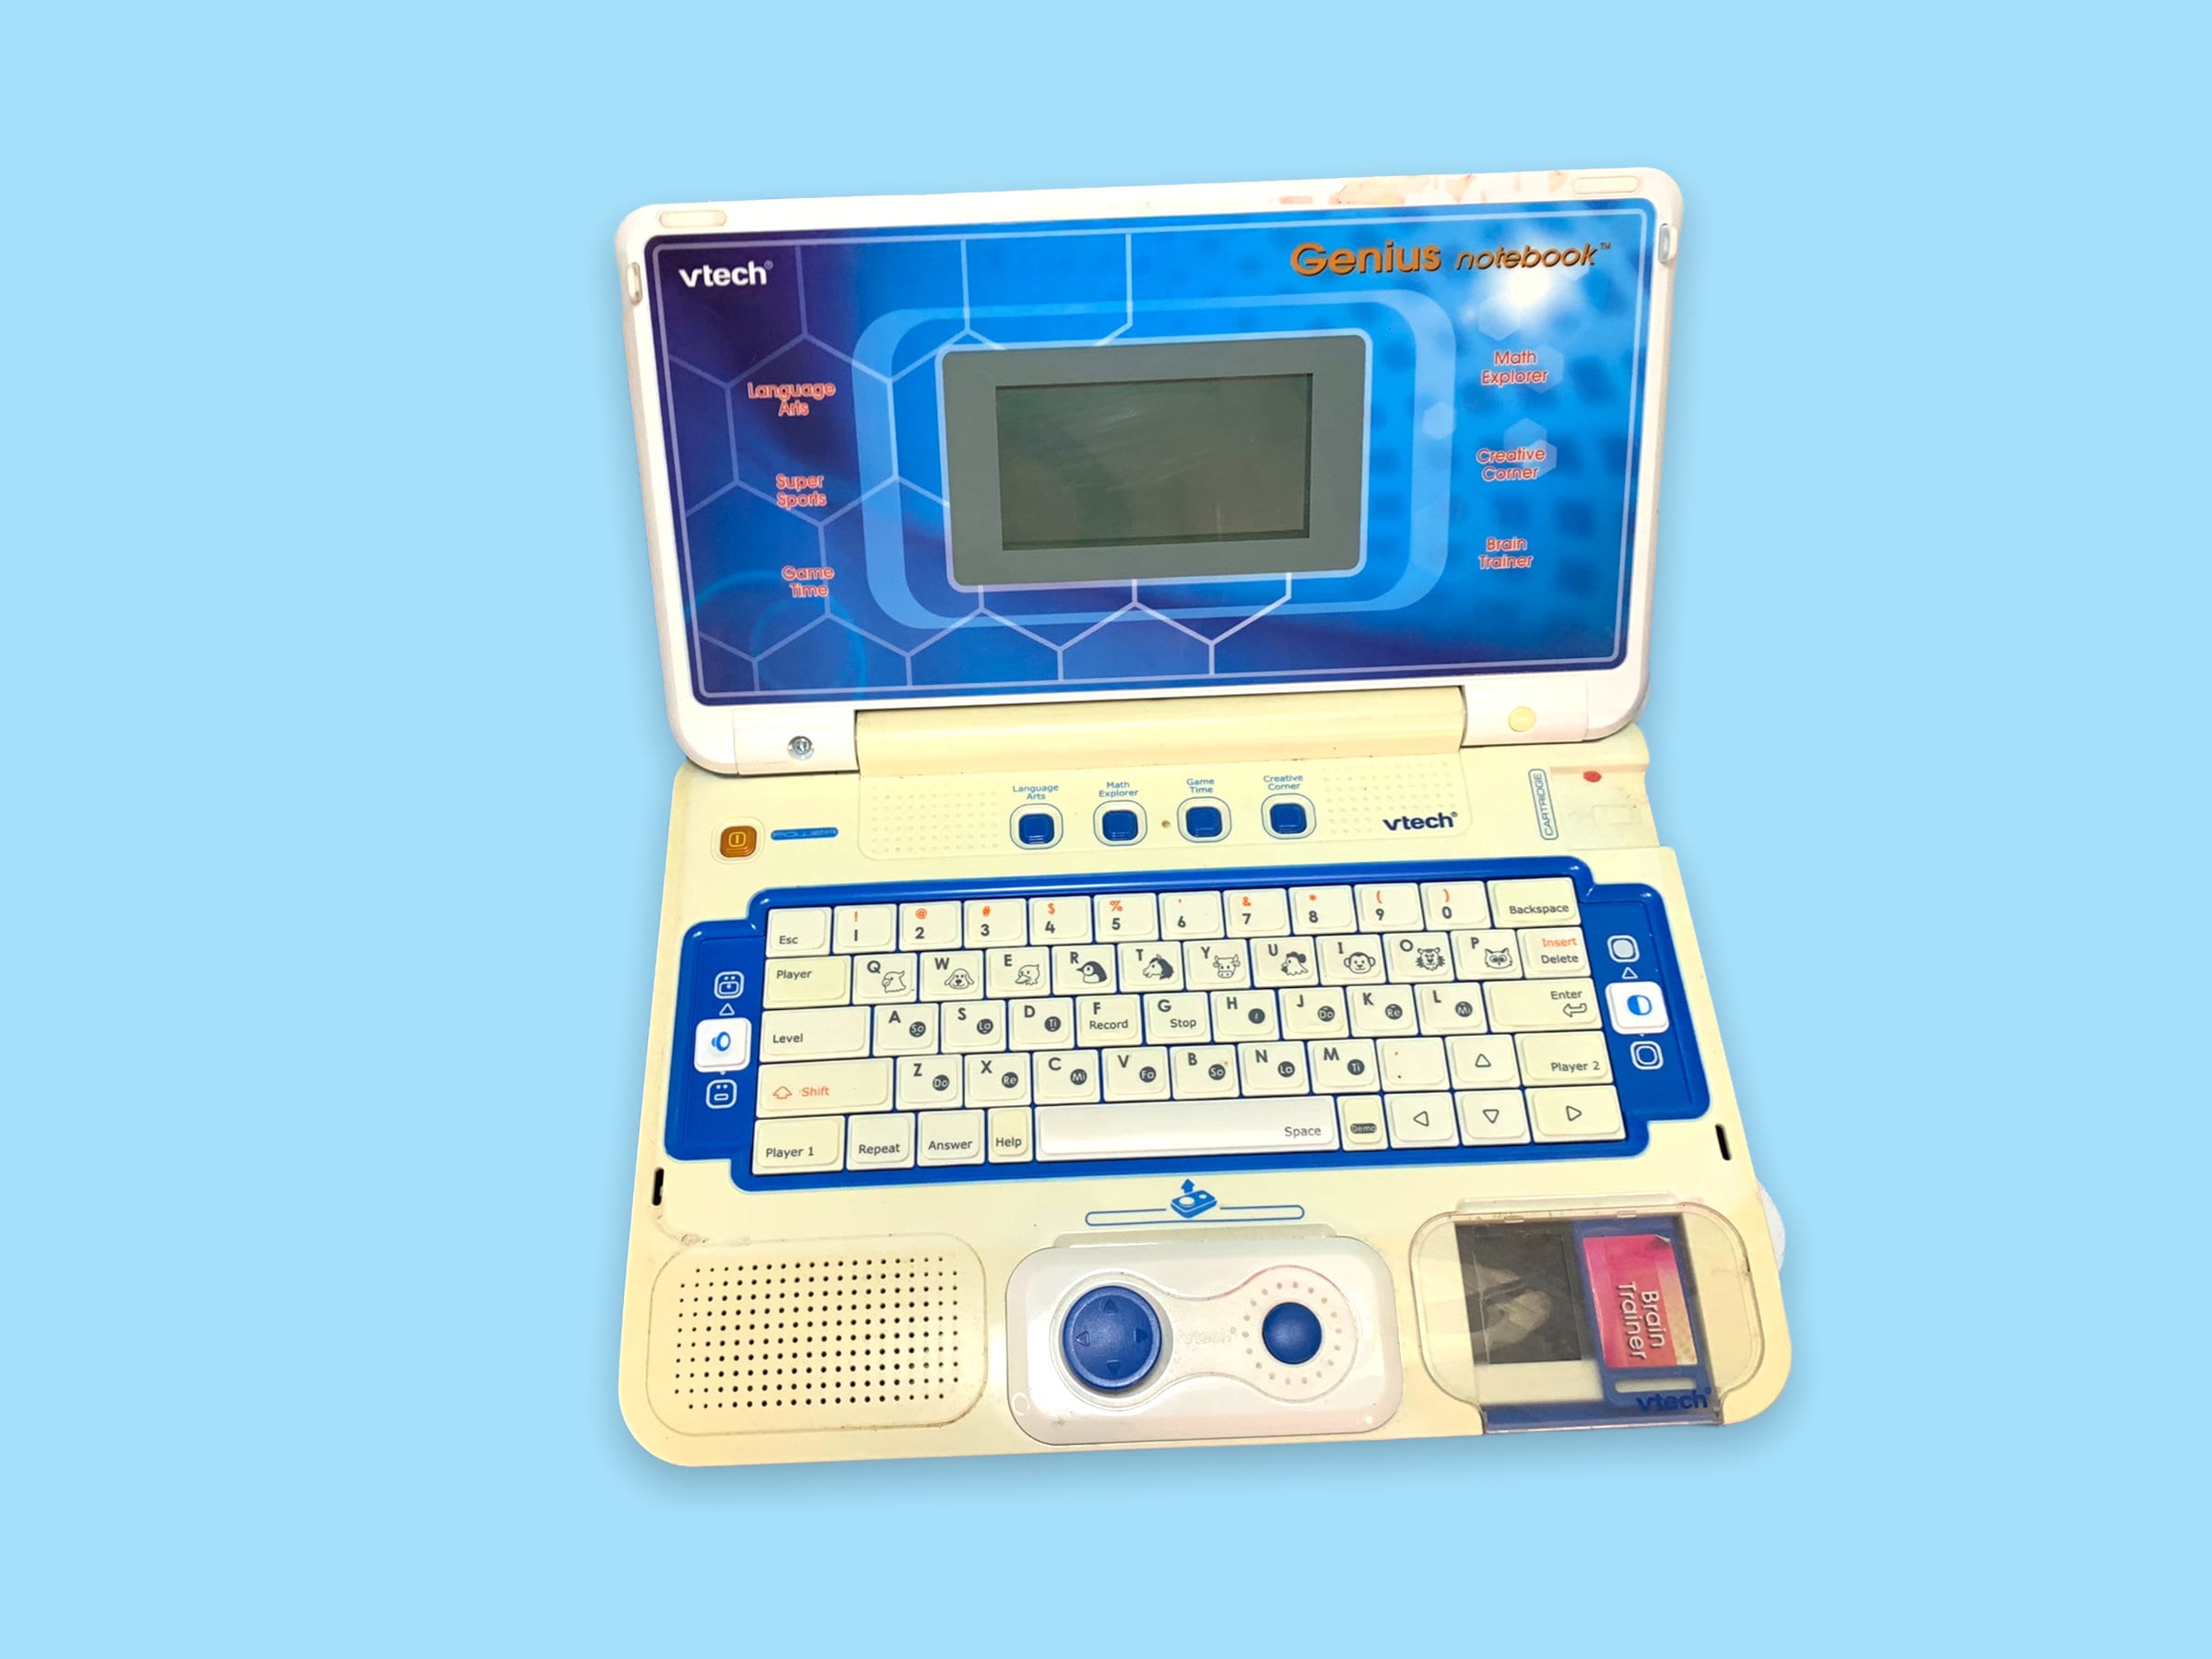 I'm trying to find the exact model of this old Vtech toy laptop so I can  find the cartridges we used to have. It's from the 90s I believe, since it  used